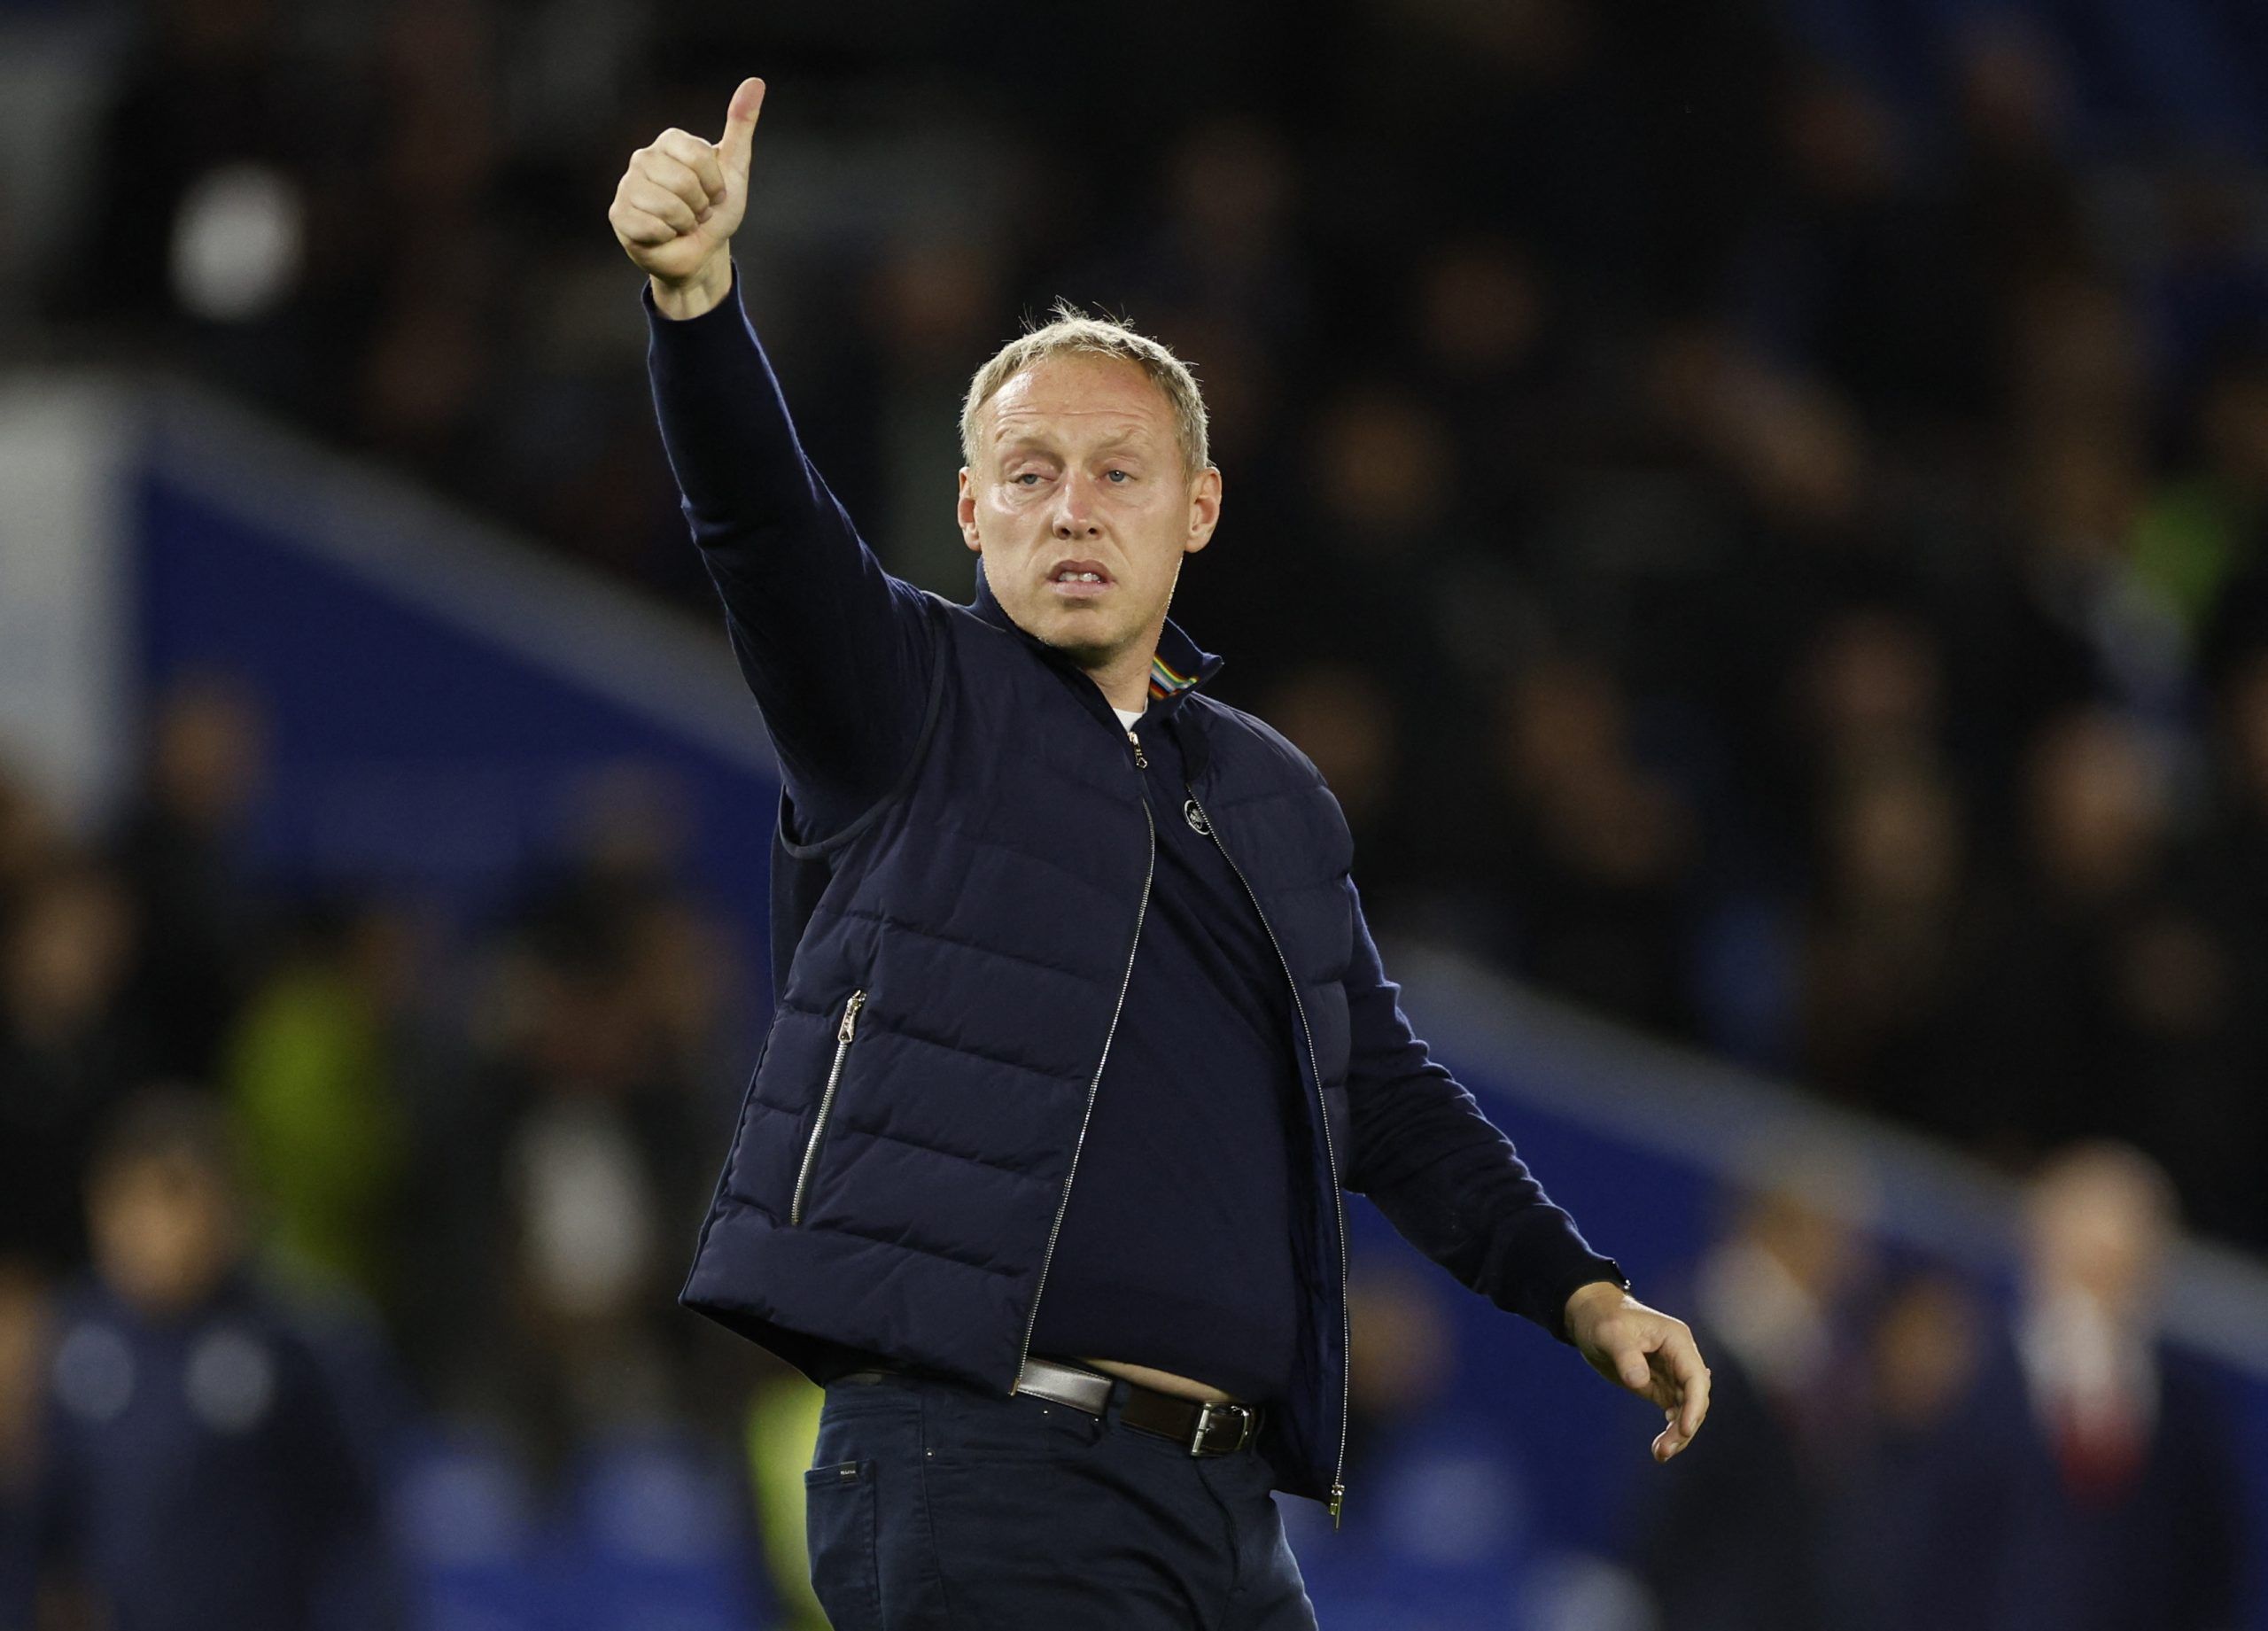 Soccer Football - Premier League - Brighton &amp; Hove Albion v Nottingham Forest - The American Express Community Stadium, Brighton, Britain - October 18, 2022 Nottingham Forest manager Steve Cooper reacts after the match Action Images via Reuters/John Sibley EDITORIAL USE ONLY. No use with unauthorized audio, video, data, fixture lists, club/league logos or 'live' services. Online in-match use limited to 75 images, no video emulation. No use in betting, games or single club /league/player publ